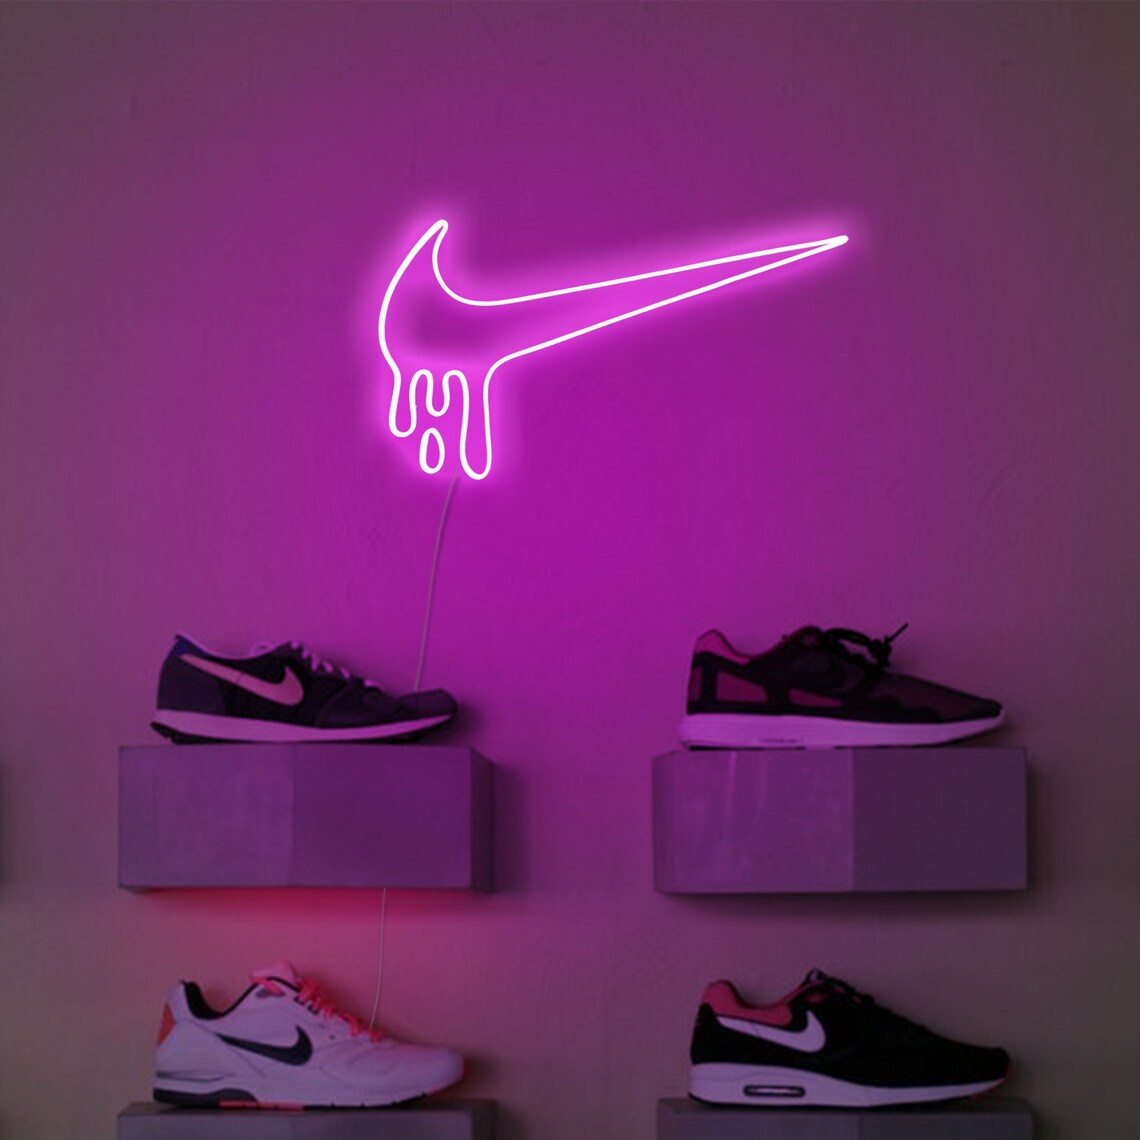 Handcraft LED Neon Sign 'Air Running Shoes' 16x9 Inches Super Bright Made  in USA 12vDC White/Red - Amazon.com